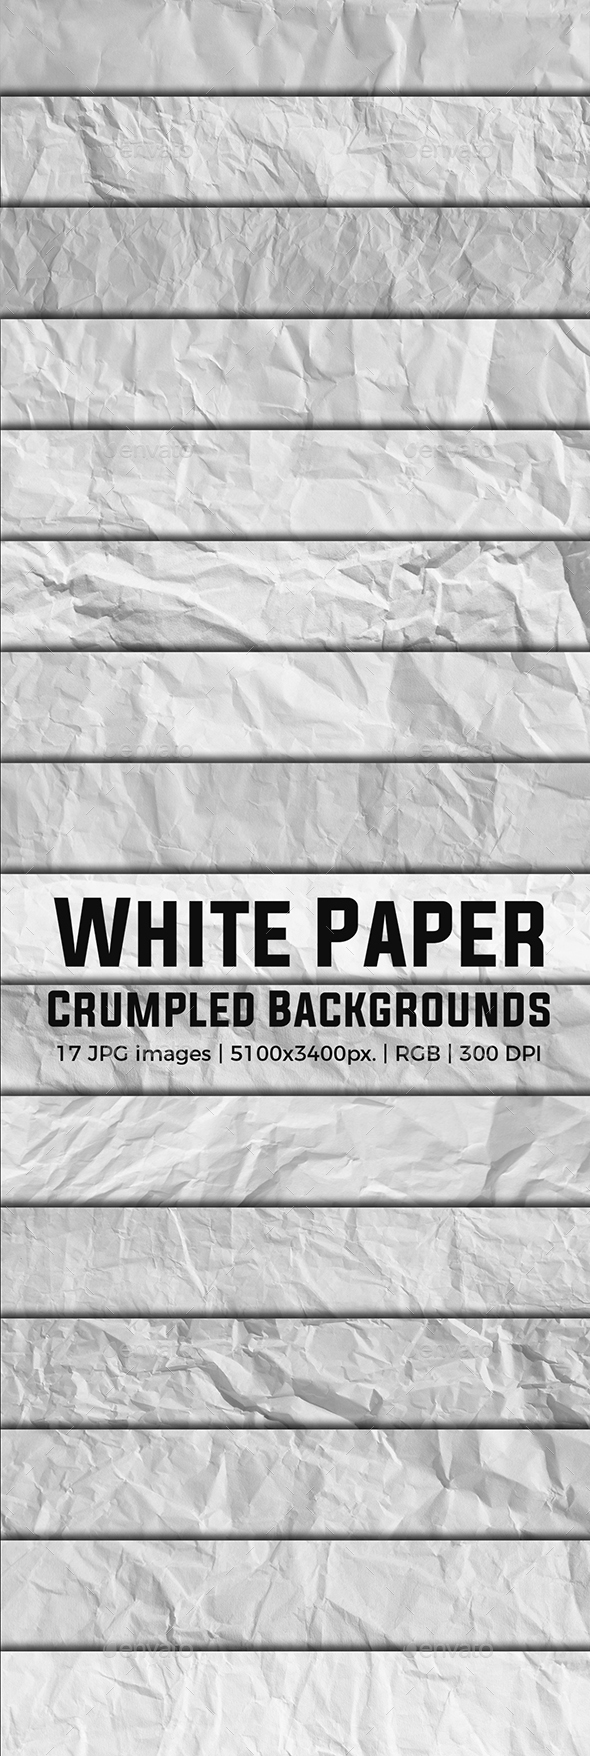 White Paper Crumpled Backgrounds